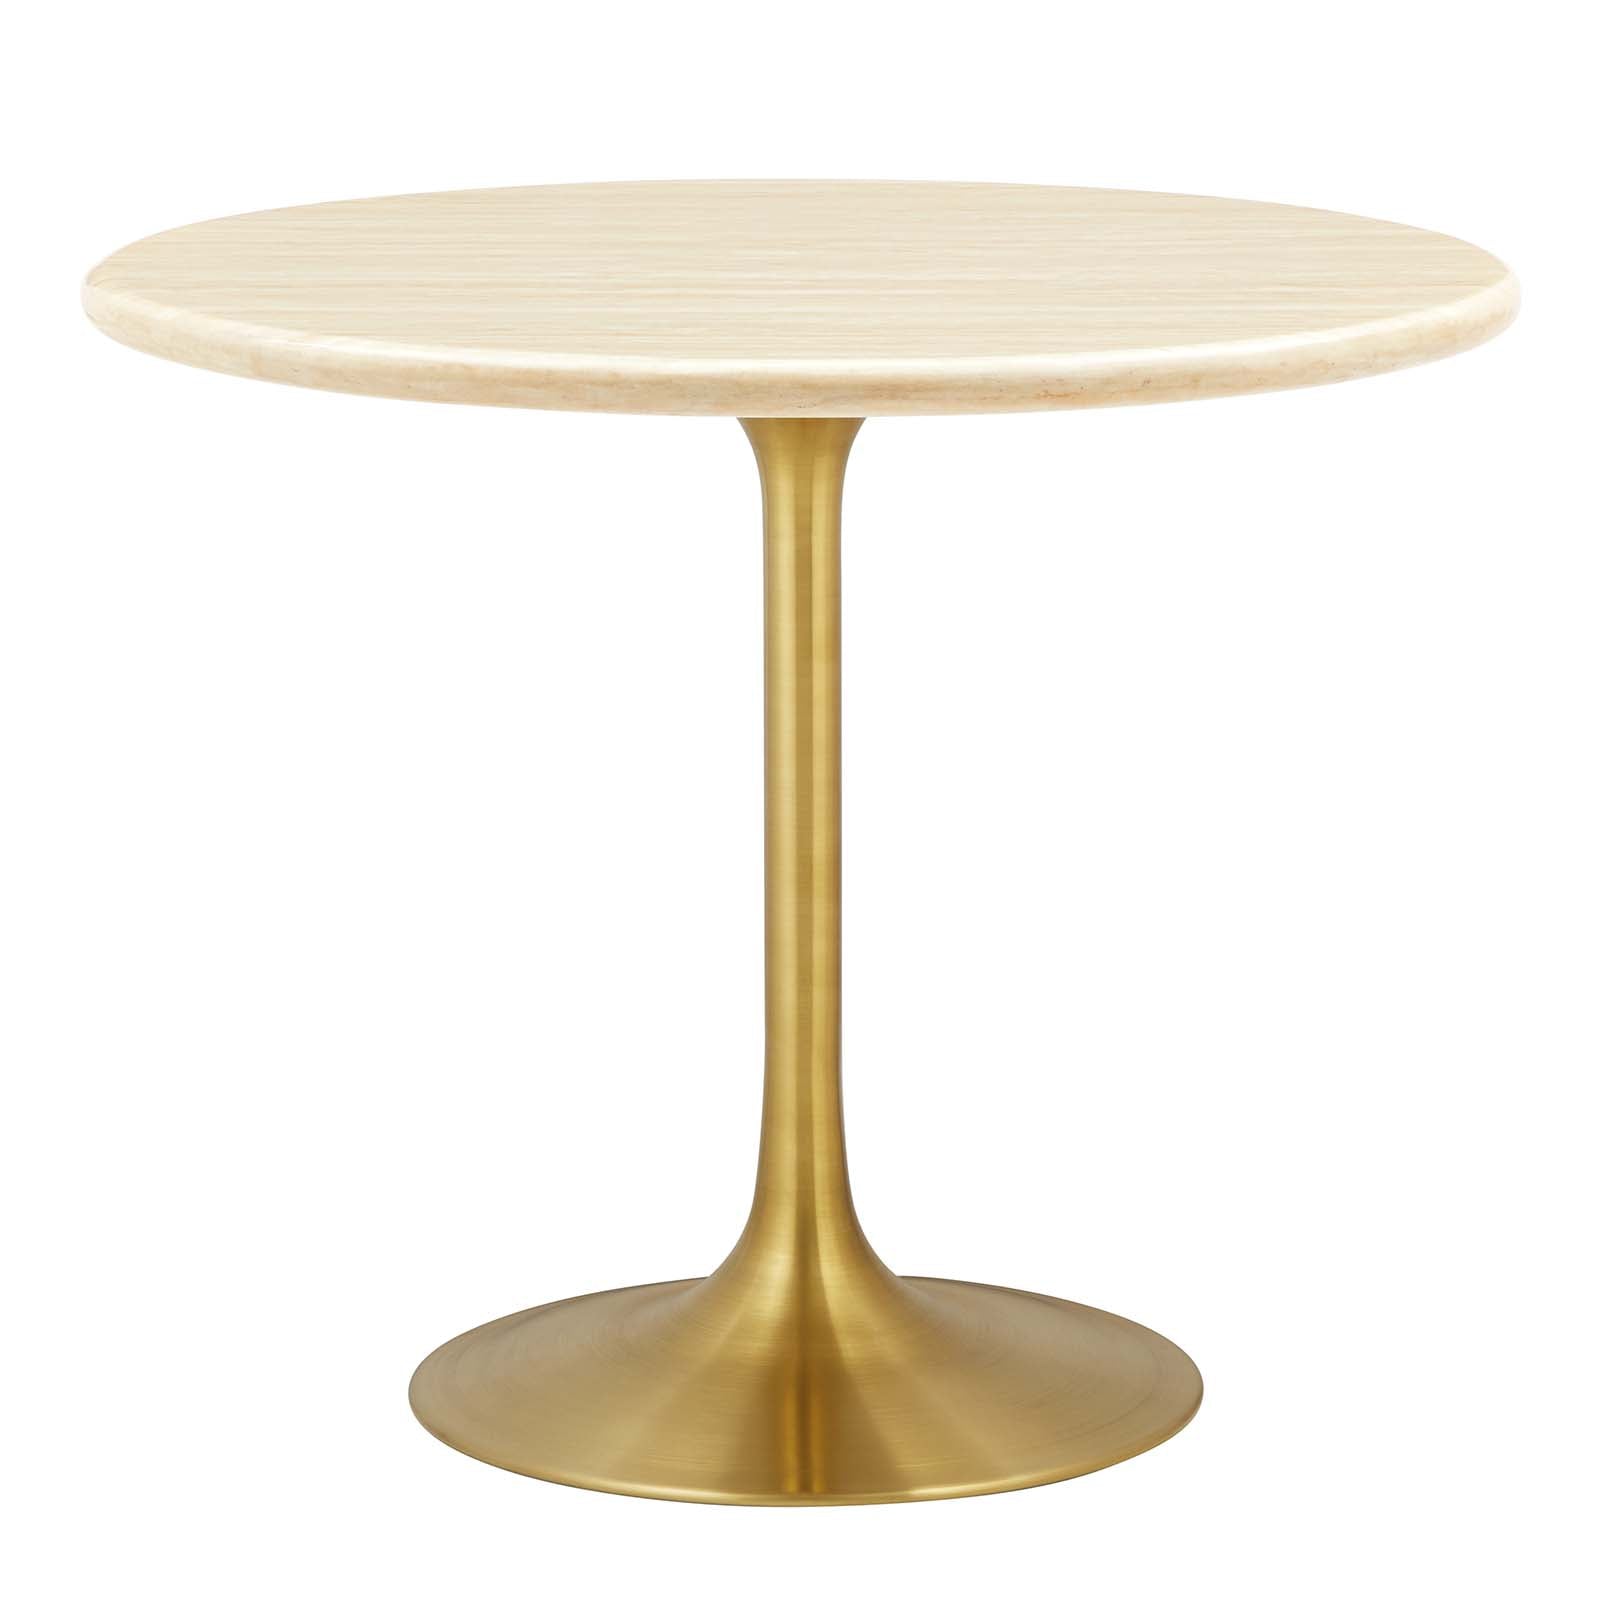 Lippa 36” Round Artificial Travertine Dining Table-Dining Table-Modway-Wall2Wall Furnishings